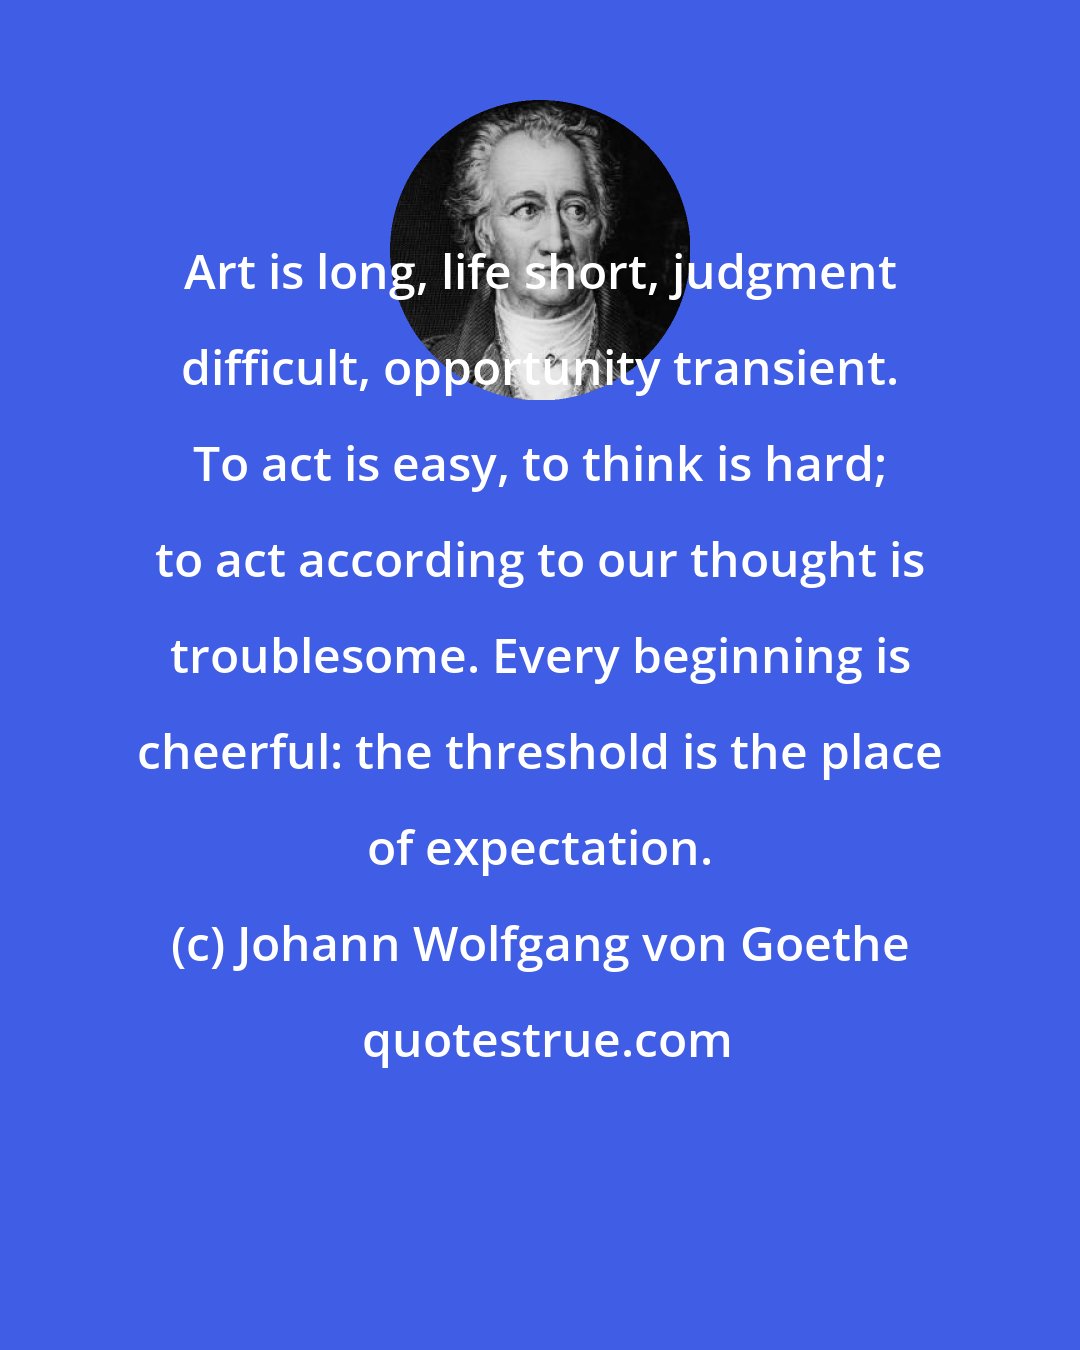 Johann Wolfgang von Goethe: Art is long, life short, judgment difficult, opportunity transient. To act is easy, to think is hard; to act according to our thought is troublesome. Every beginning is cheerful: the threshold is the place of expectation.